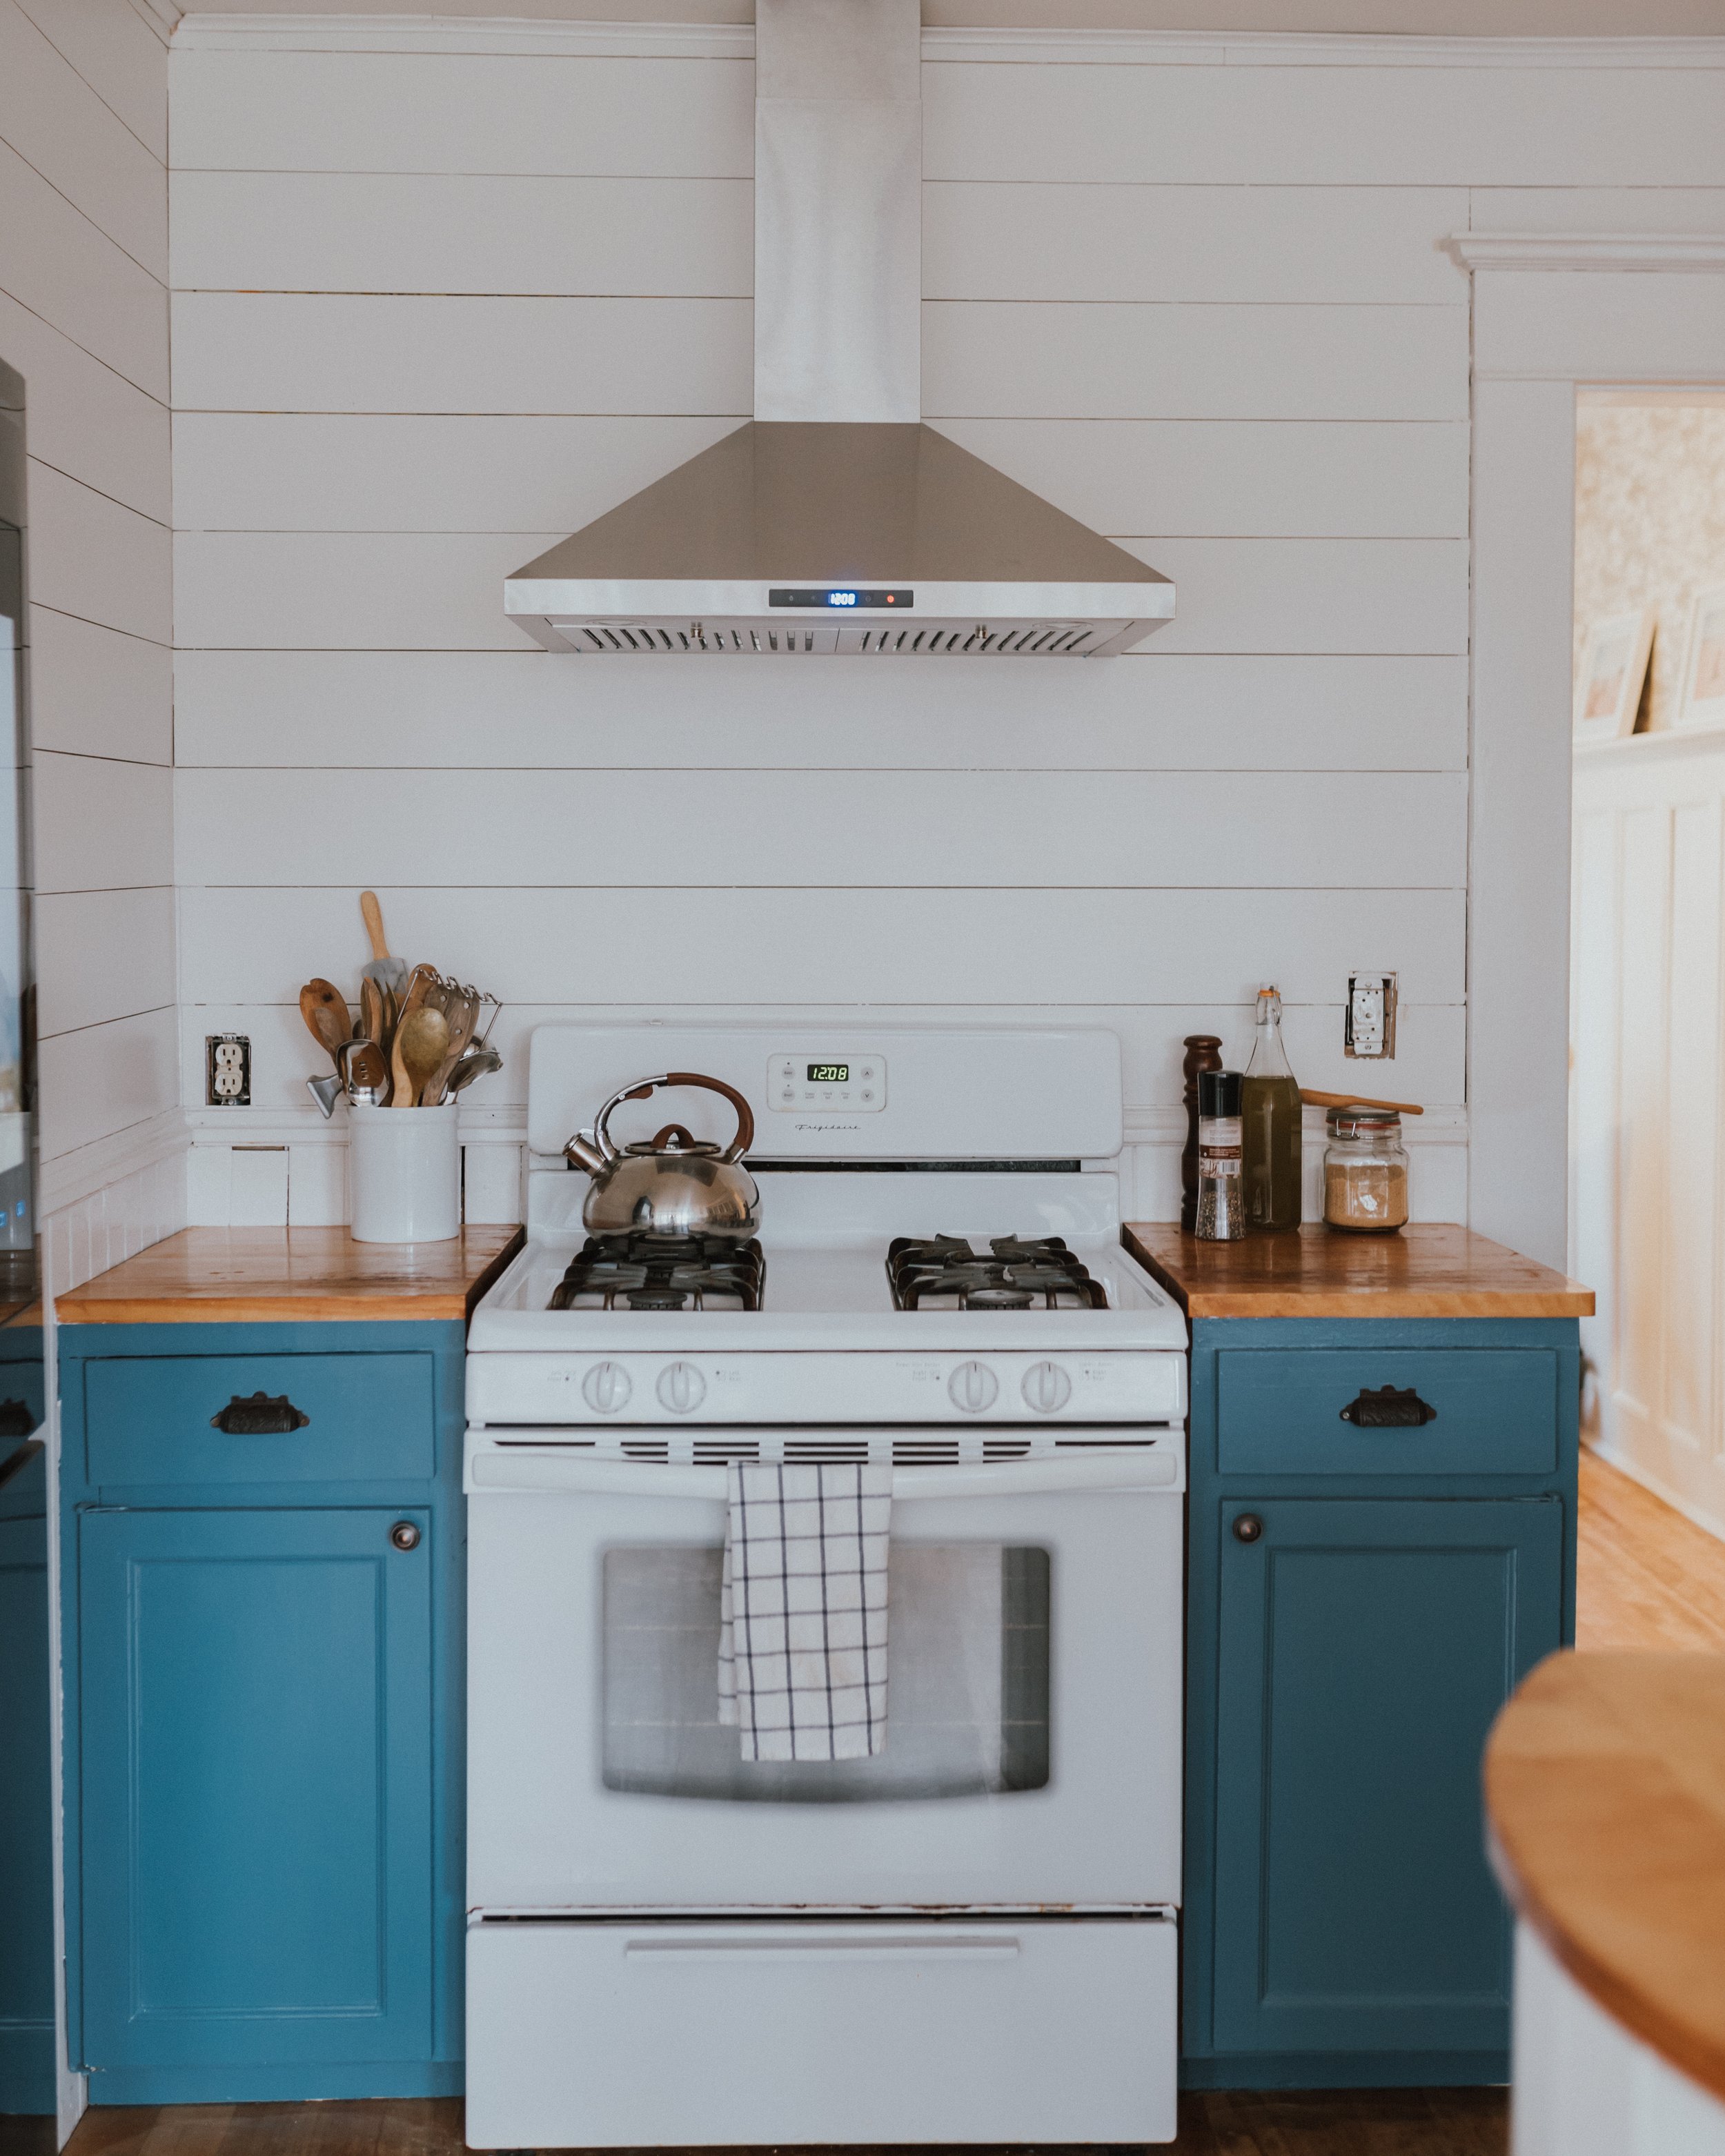 The Wild Decoelis | How We Transformed Our Kitchen For Under $1500 | after | shiplap kitchen